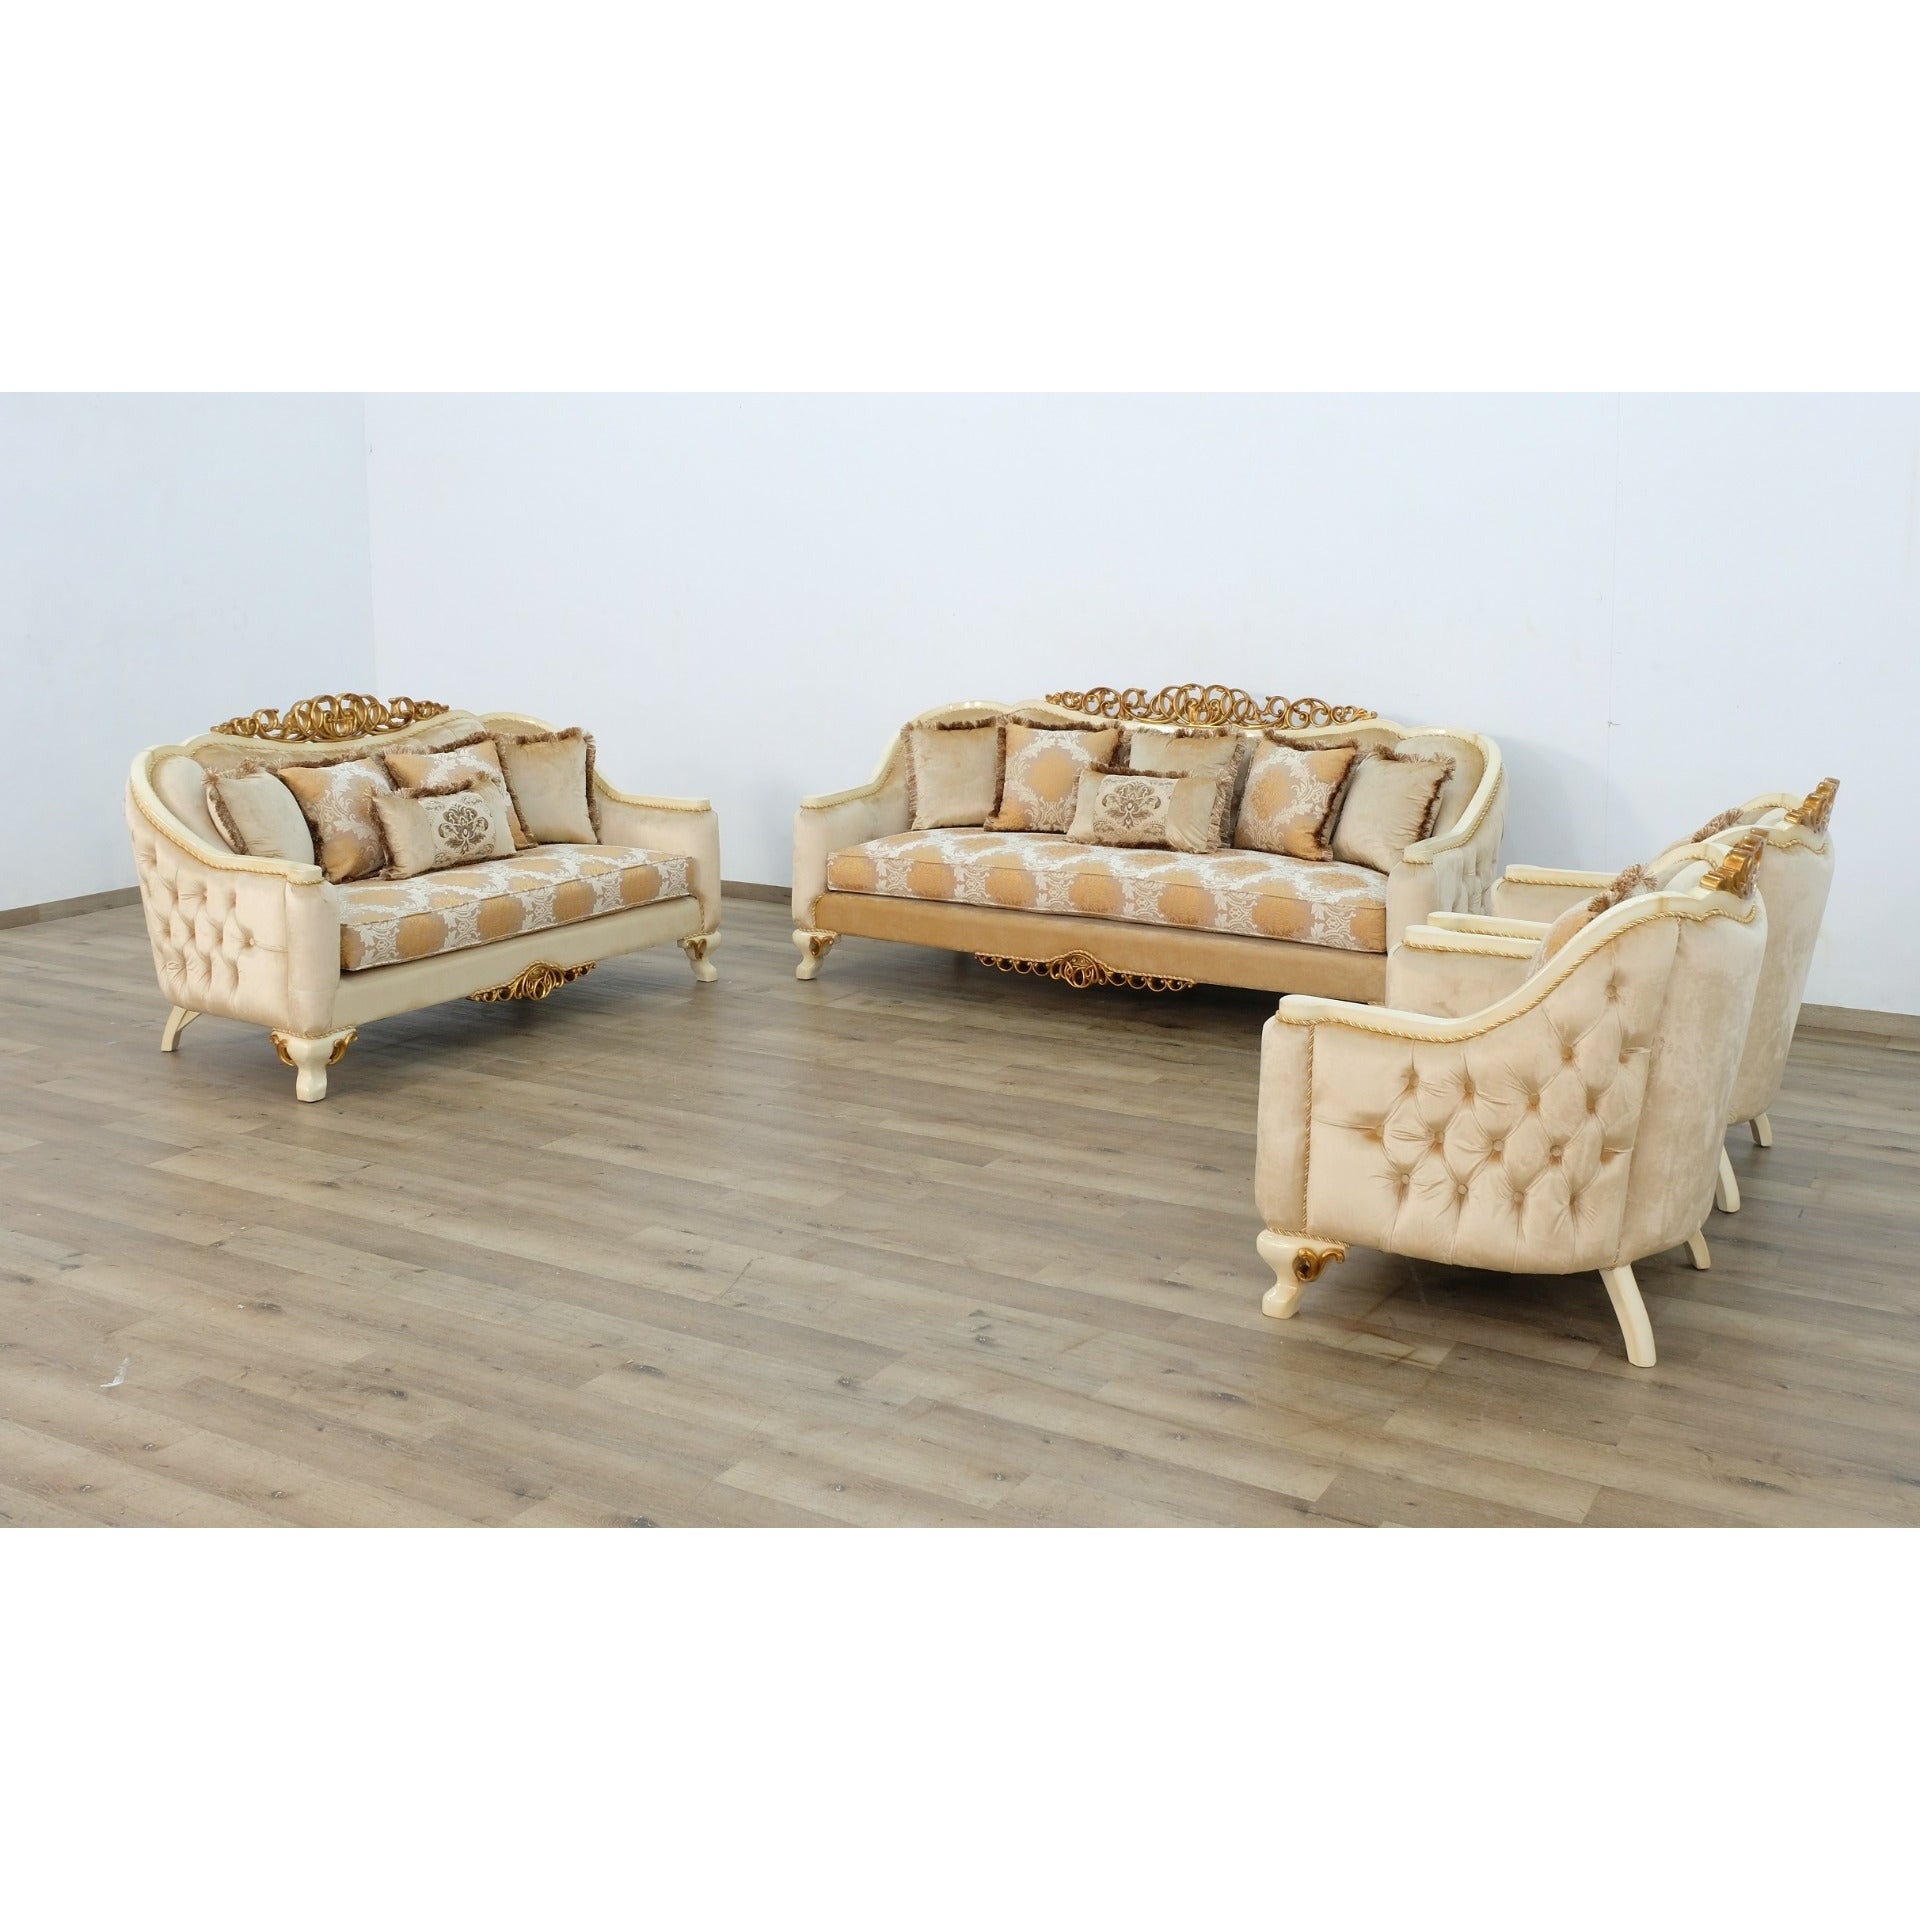 European Furniture - Angelica Sofa in Brown & Gold - 45352-S - New Star Living